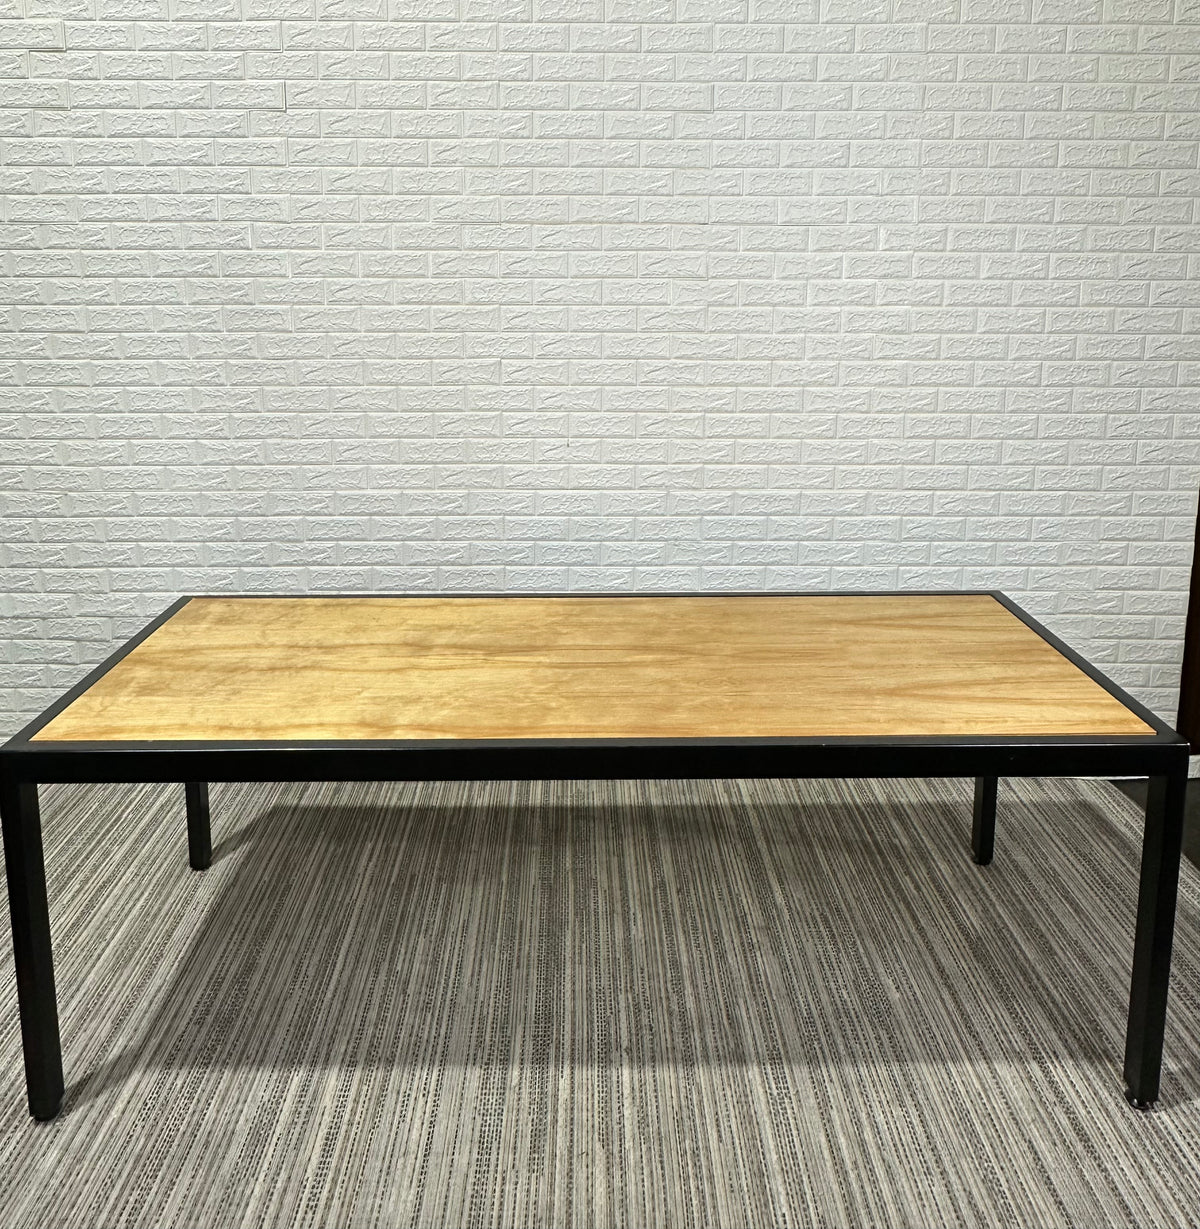 Pre-Owned Wood Top Table with Black Frames - Duckys Office Furniture